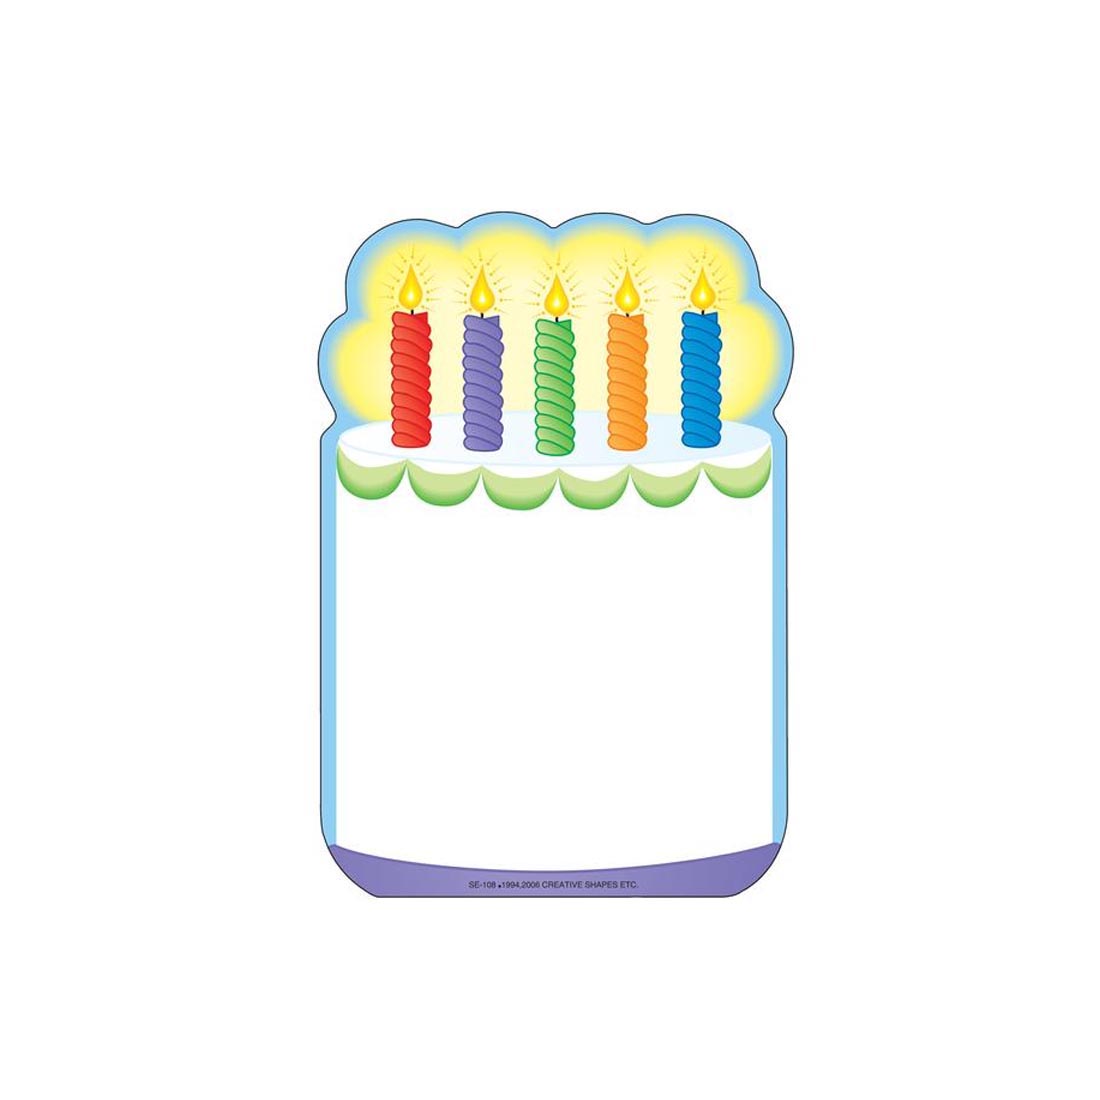 Birthday Cake Notepad by Creative Shapes